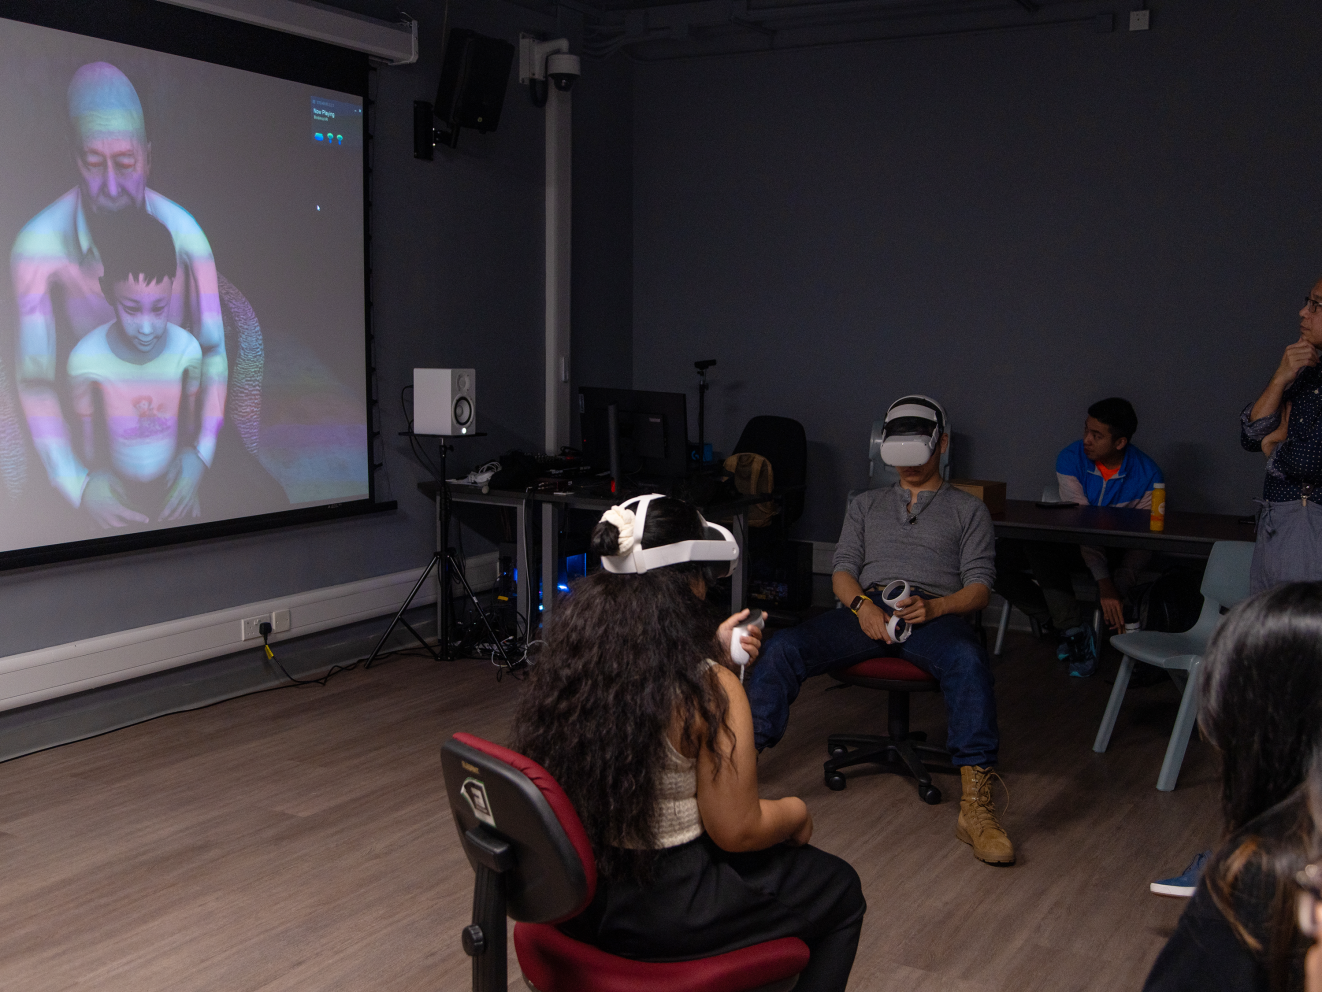 XR Gold Award-winning director Huang Hsin-chien describes immersive experience of VR works to students